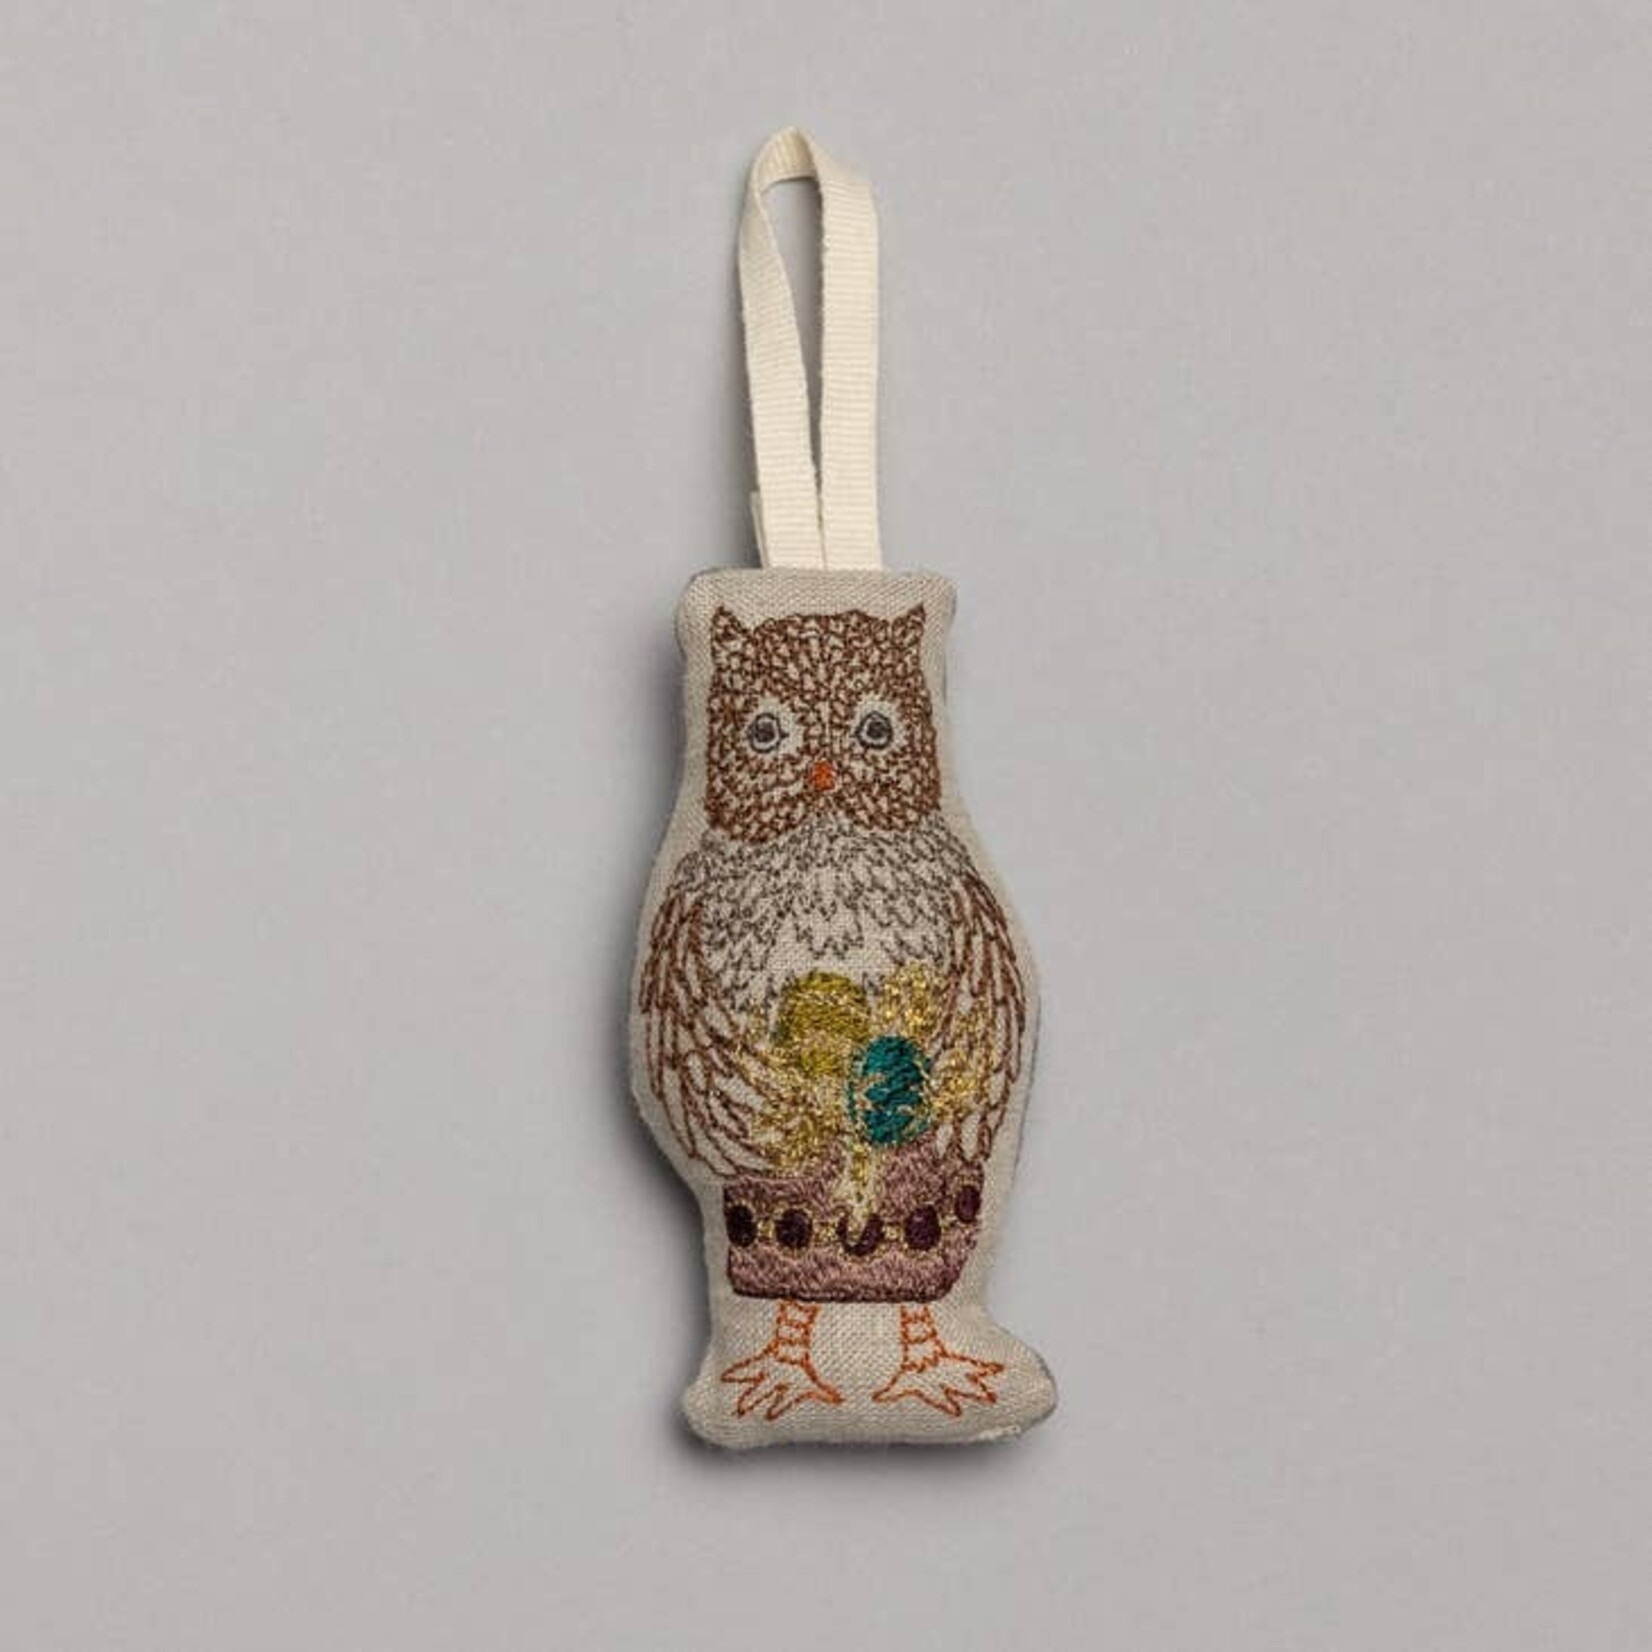 Ornaments - Embroidered Owl With Present Ornament